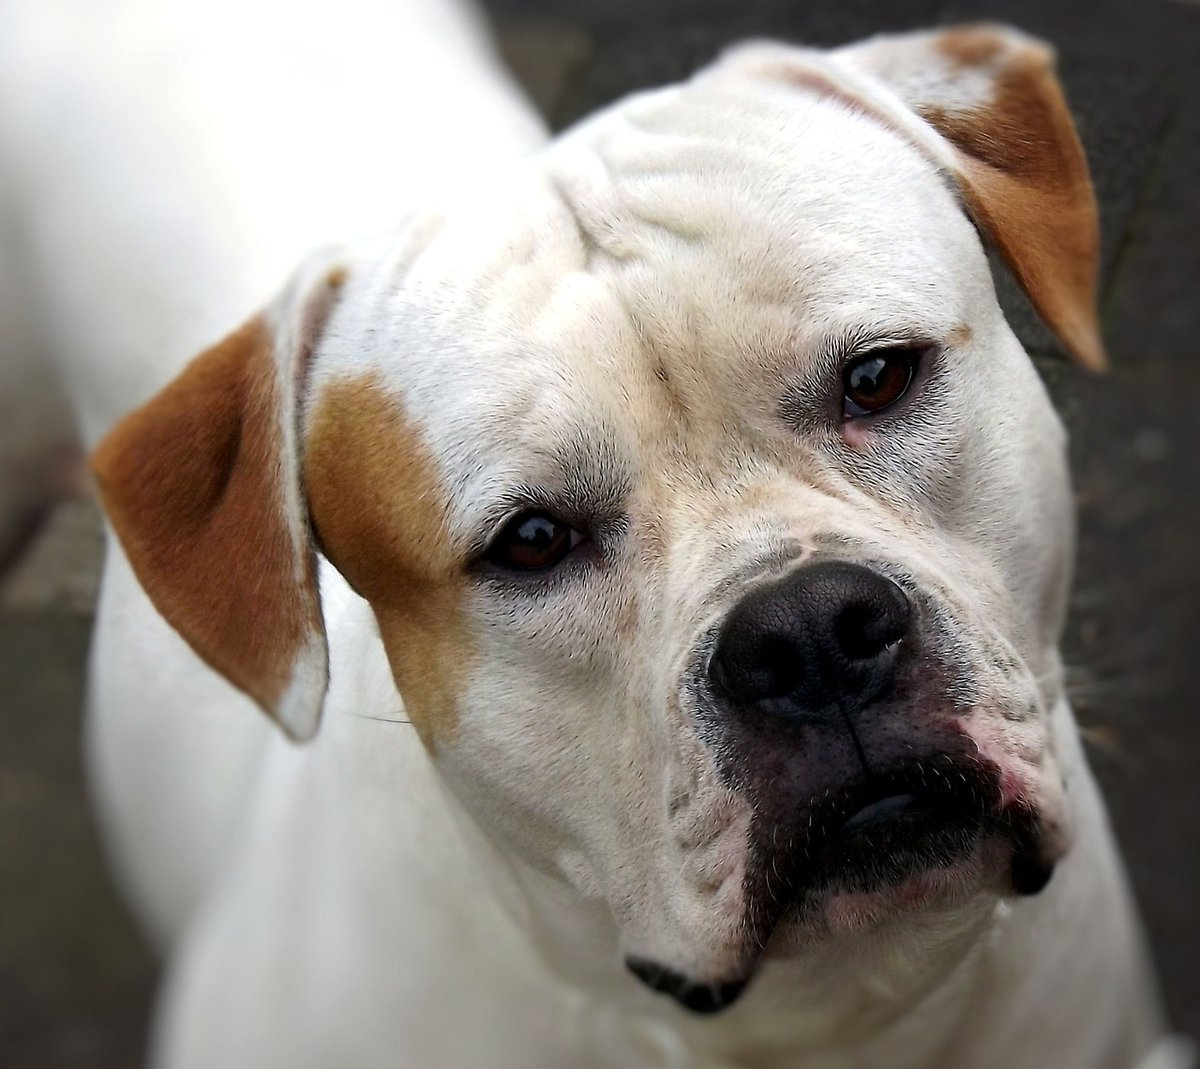 2,160 dogs were reported stolen in 2022 – that's 6 dogs a day, according to new research by Direct Line Pet Insurance. Of those that are stolen, just one in four were returned. American Bulldogs were the most-stolen breed in 2022, up 350% from 2021. More: bit.ly/3ZwmwlZ